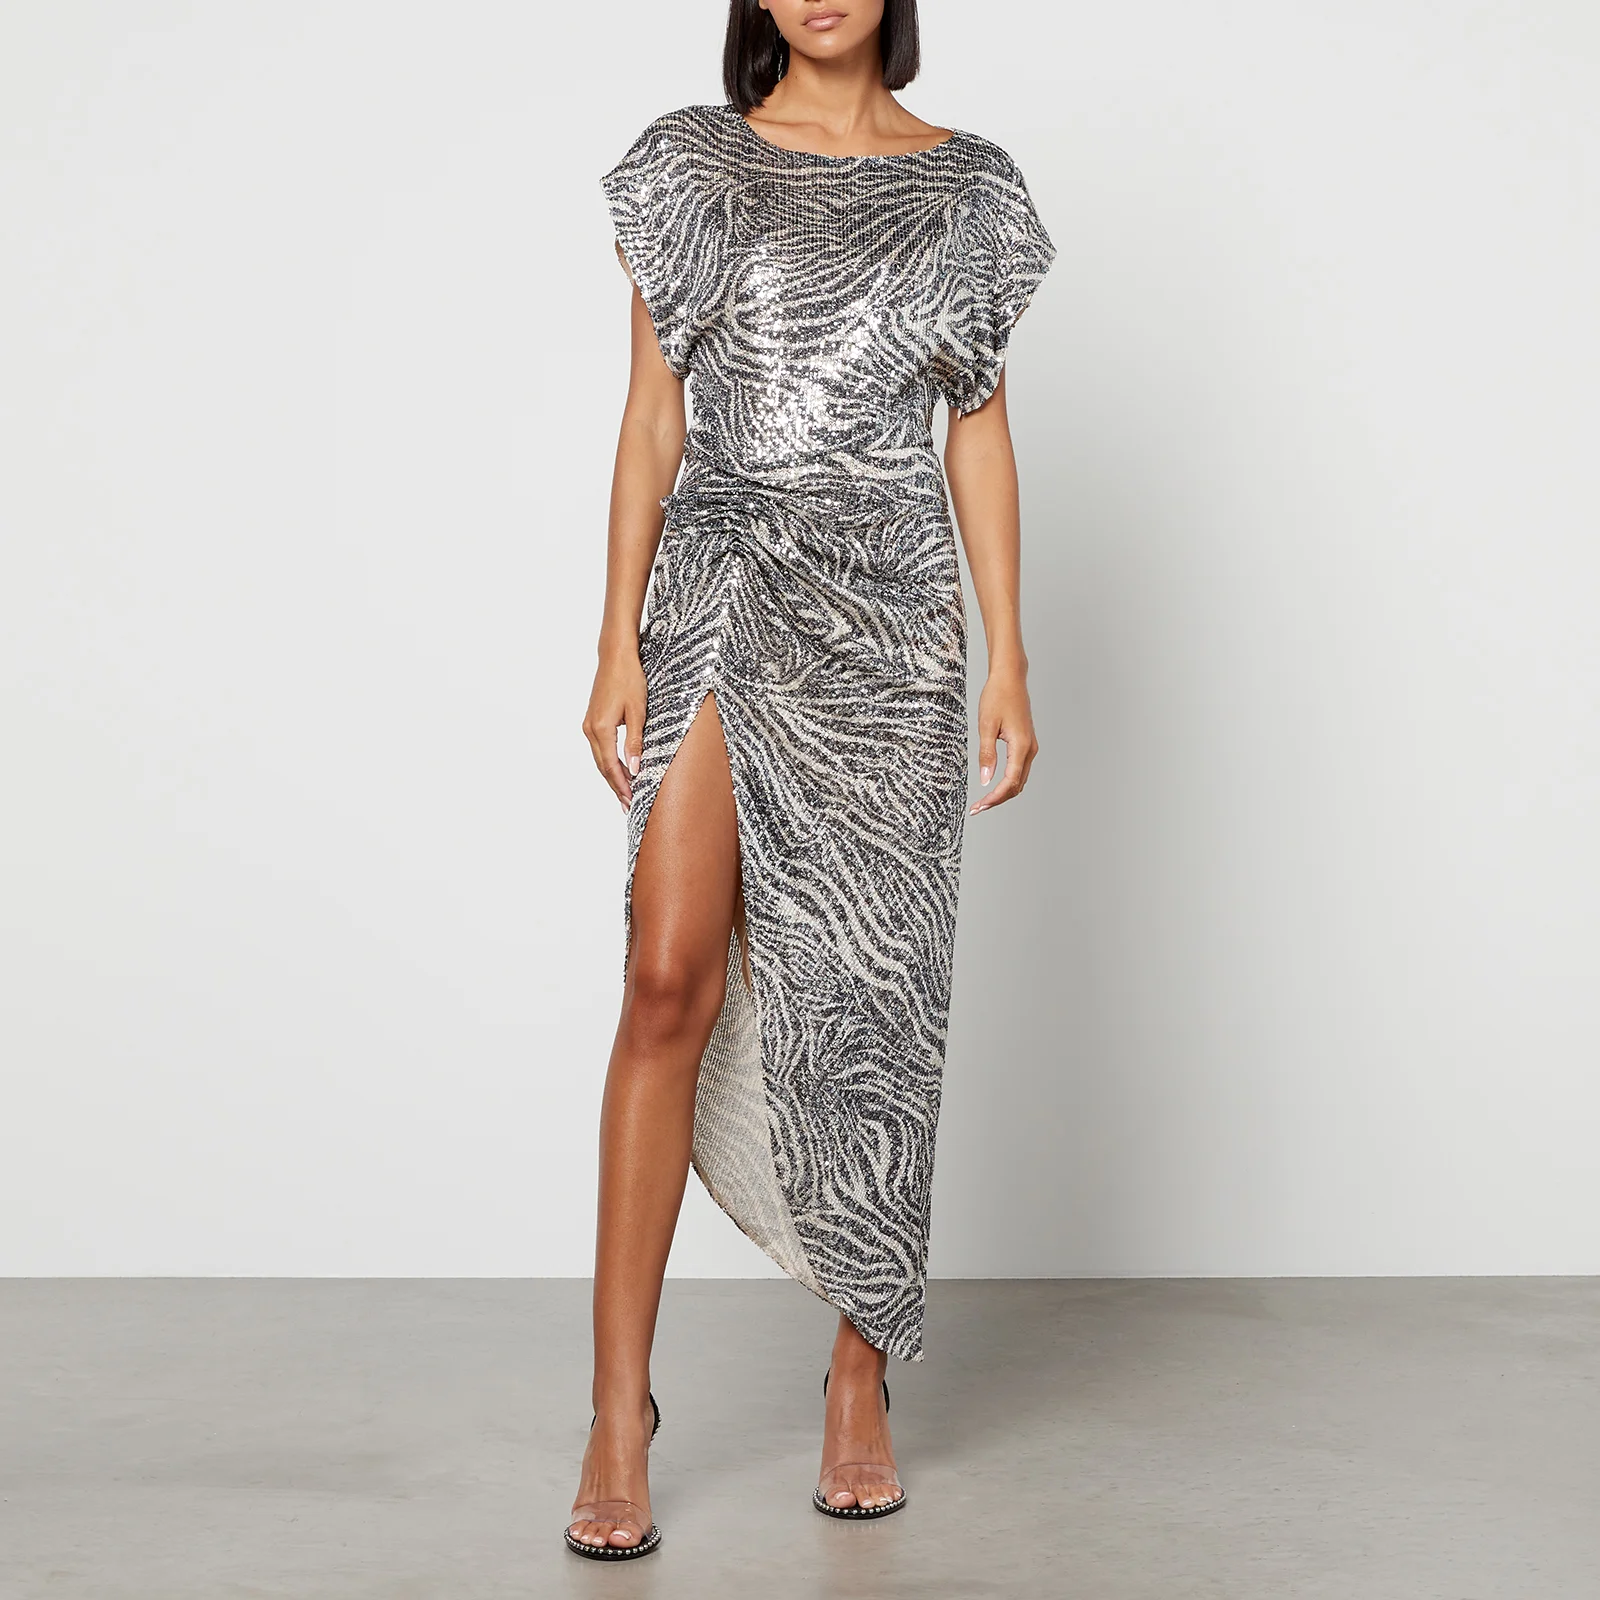 In the Mood for Love Bercot Zebra Sequined Maxi Dress Image 1